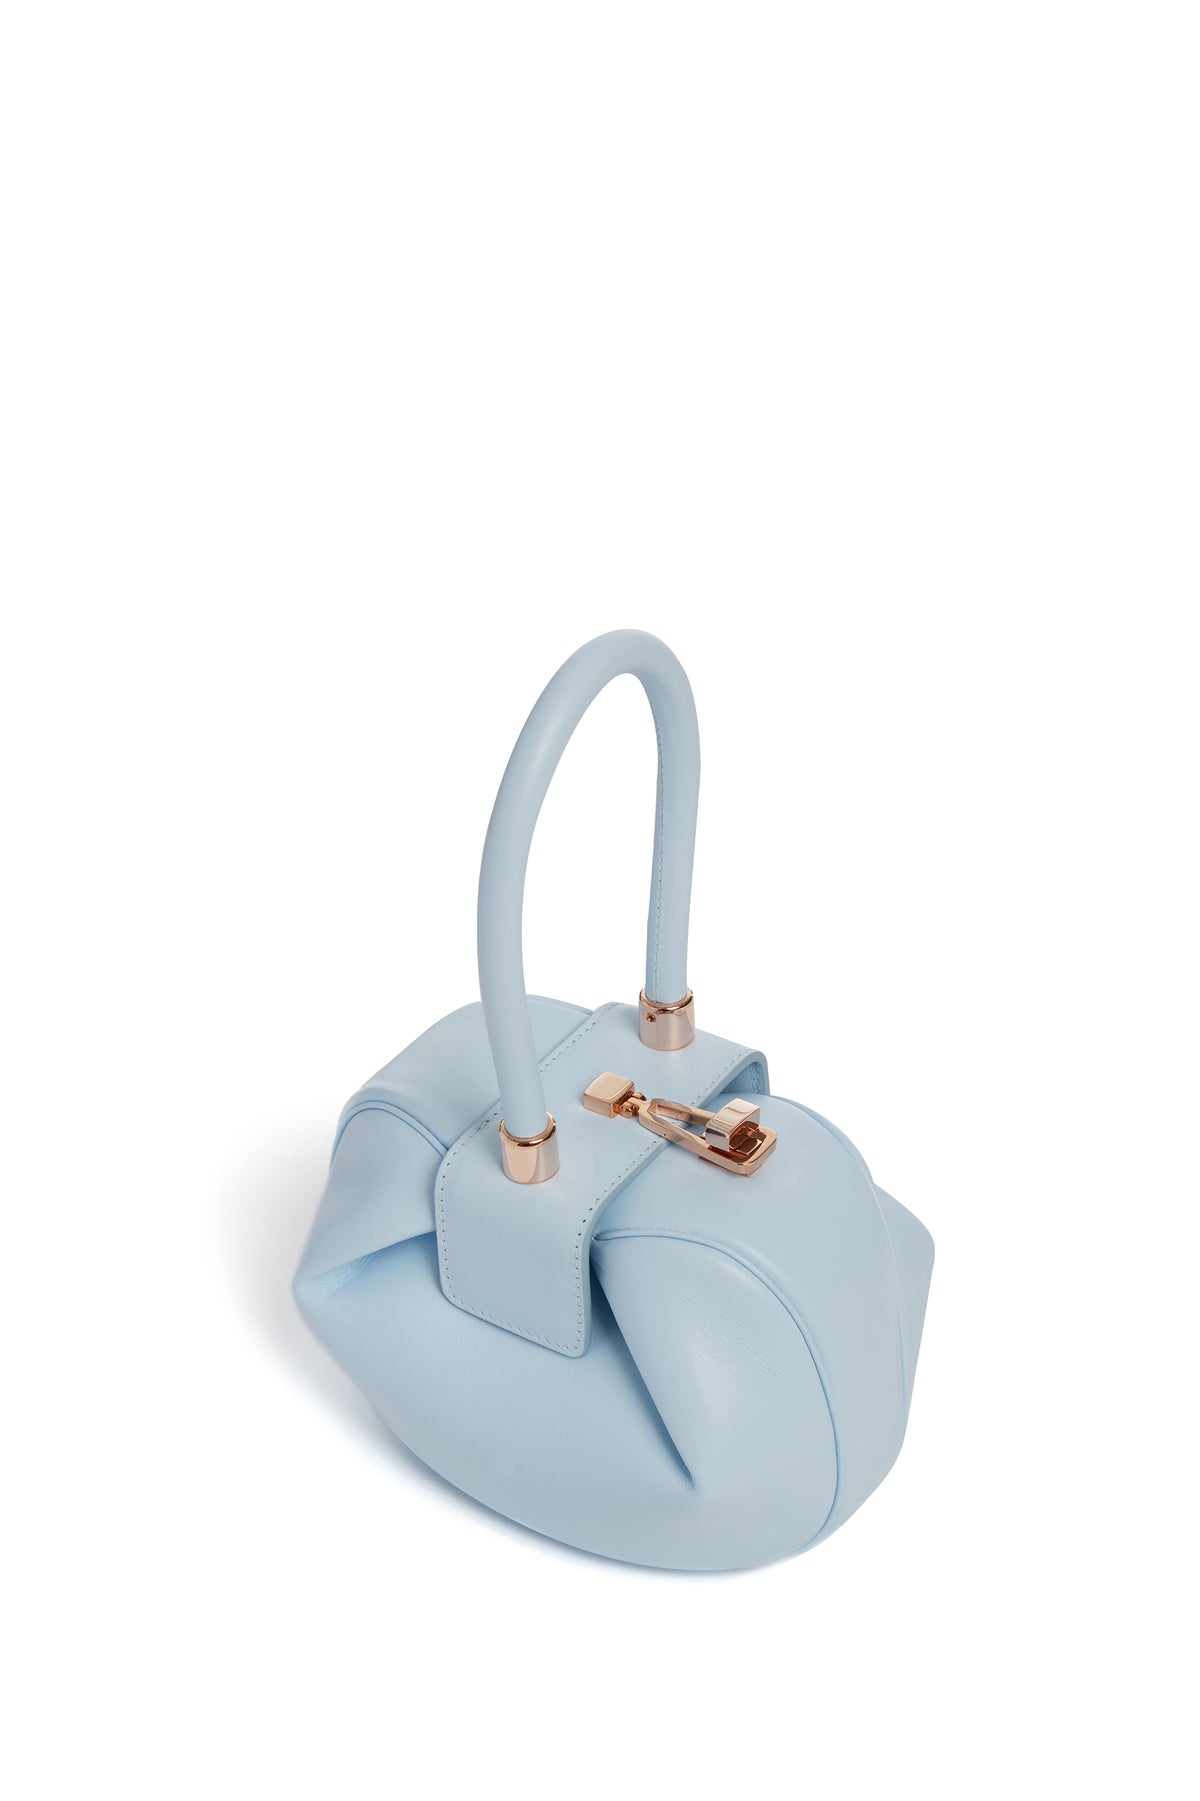 Demi Bag in Light Blue Nappa Leather